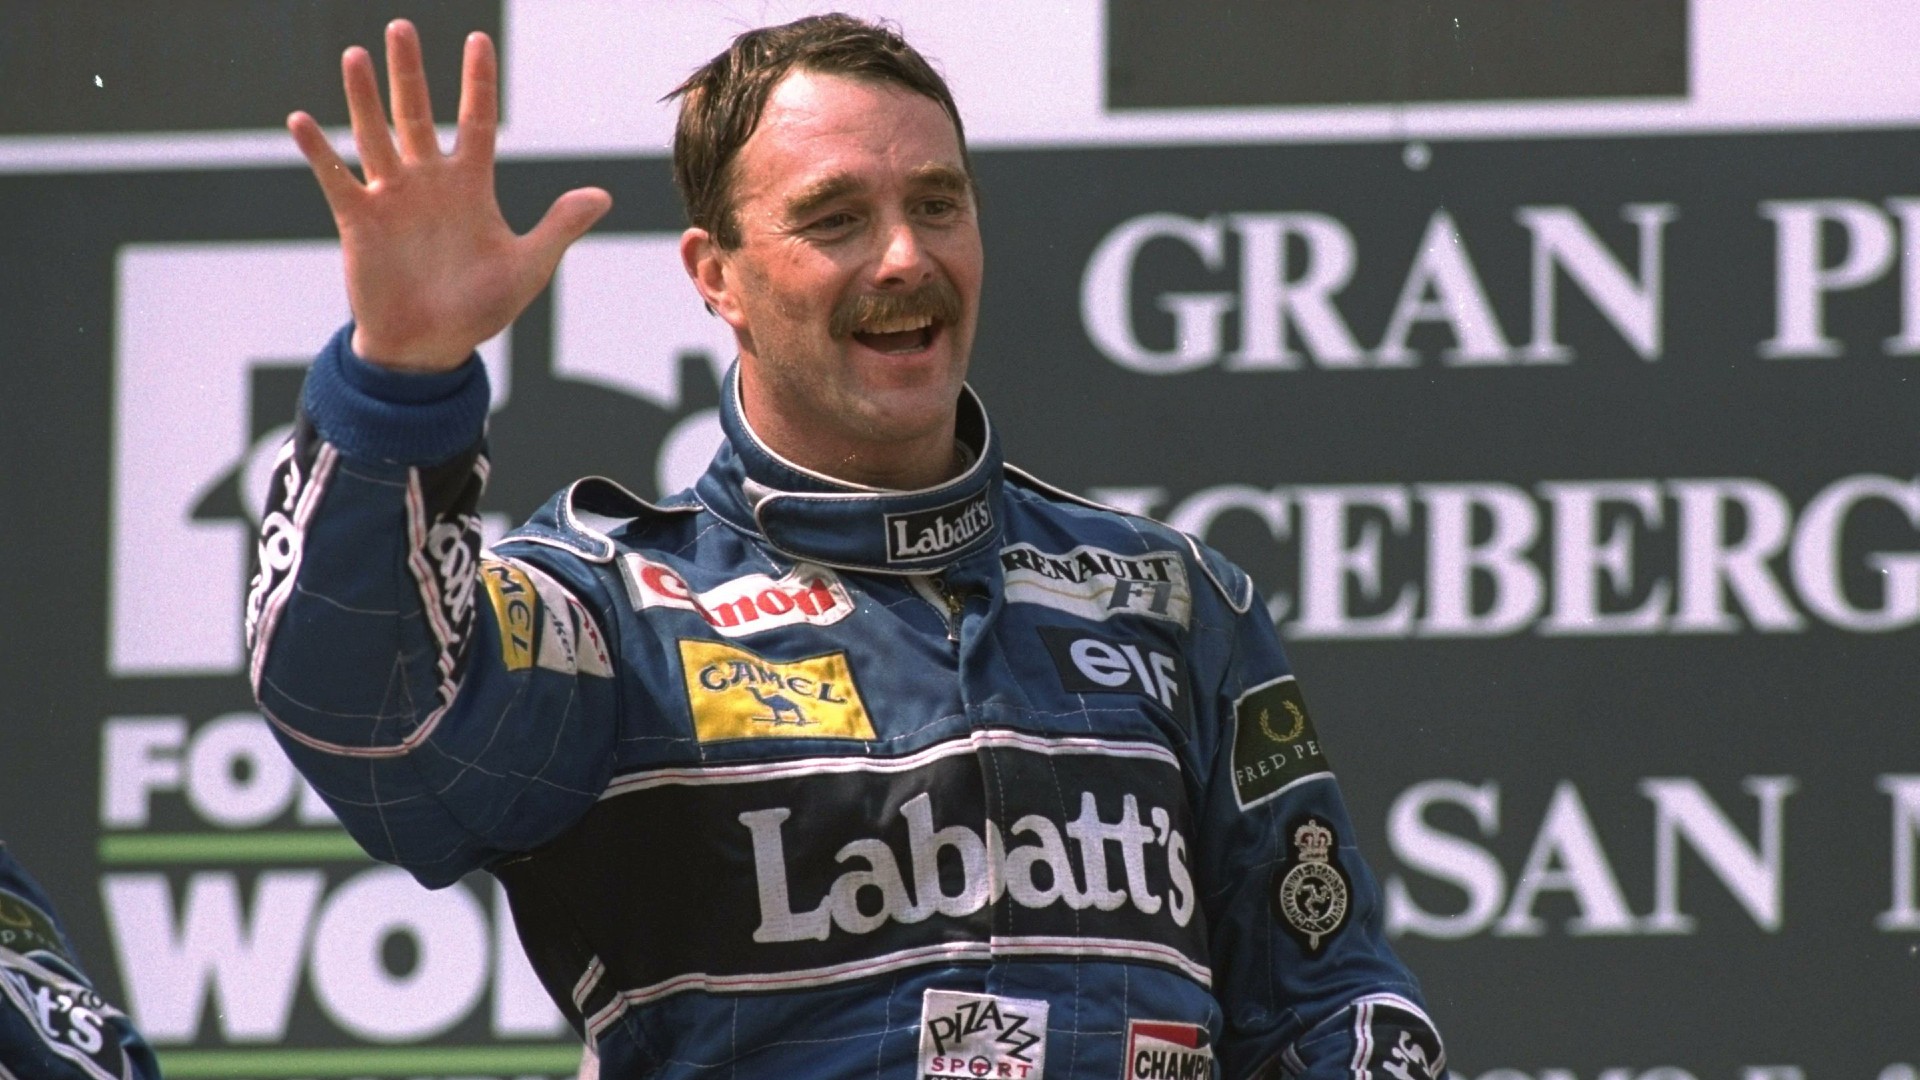 Nigel Mansell 2021 - Net worth, Career, Records and Personal Life